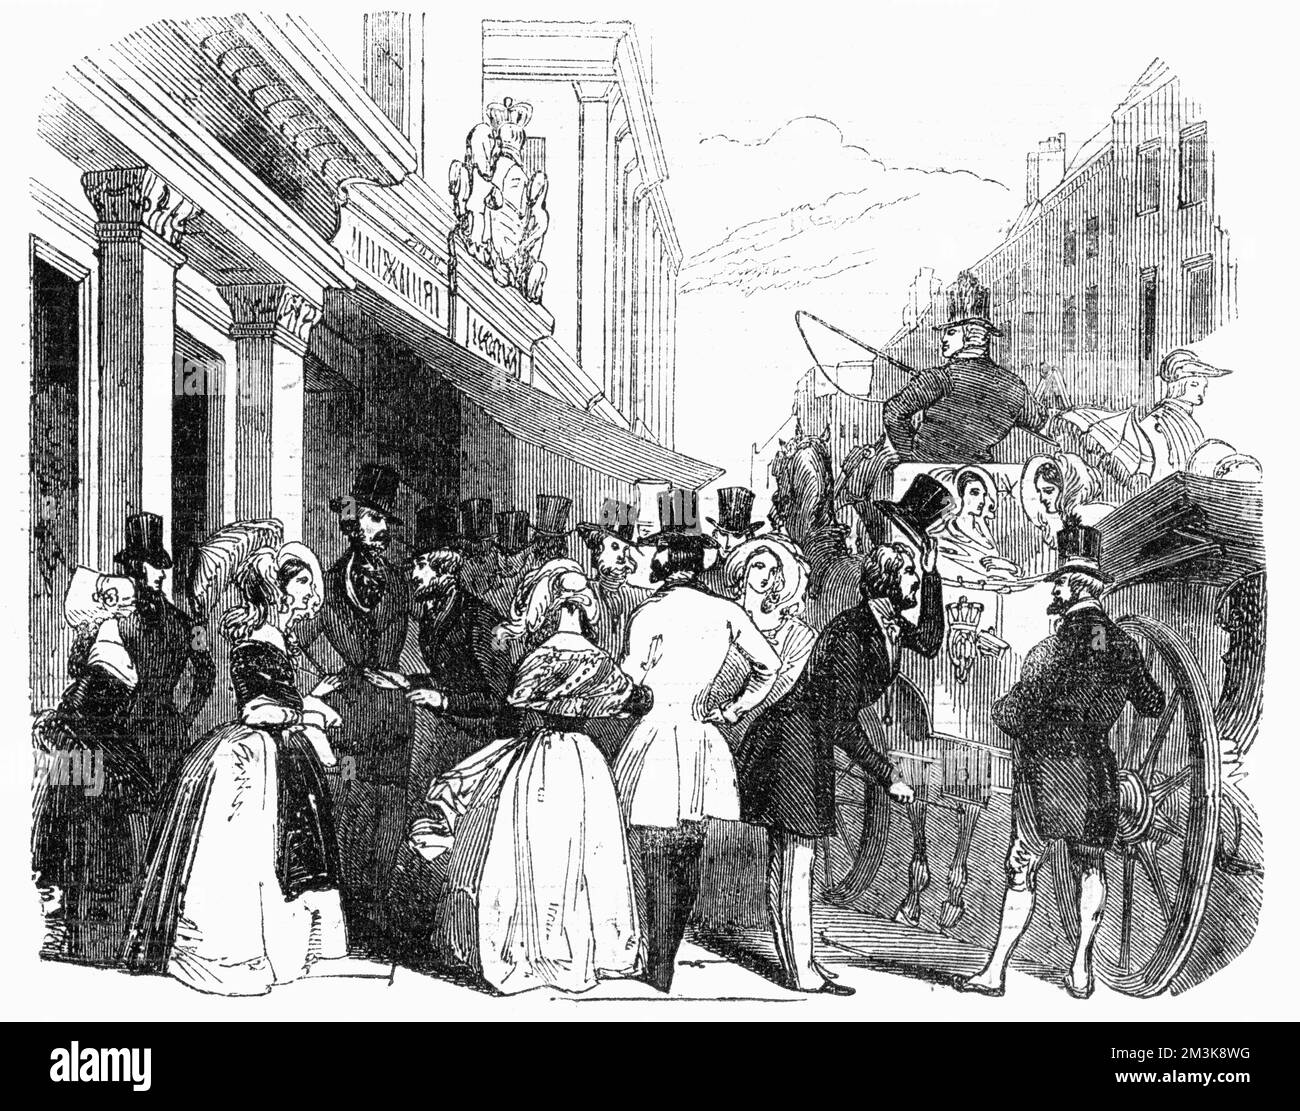 'Centre of elegance and  fashion's mart' - Bond Street  is already established as the  place to go for clothes and  accessories.   1843 Stock Photo